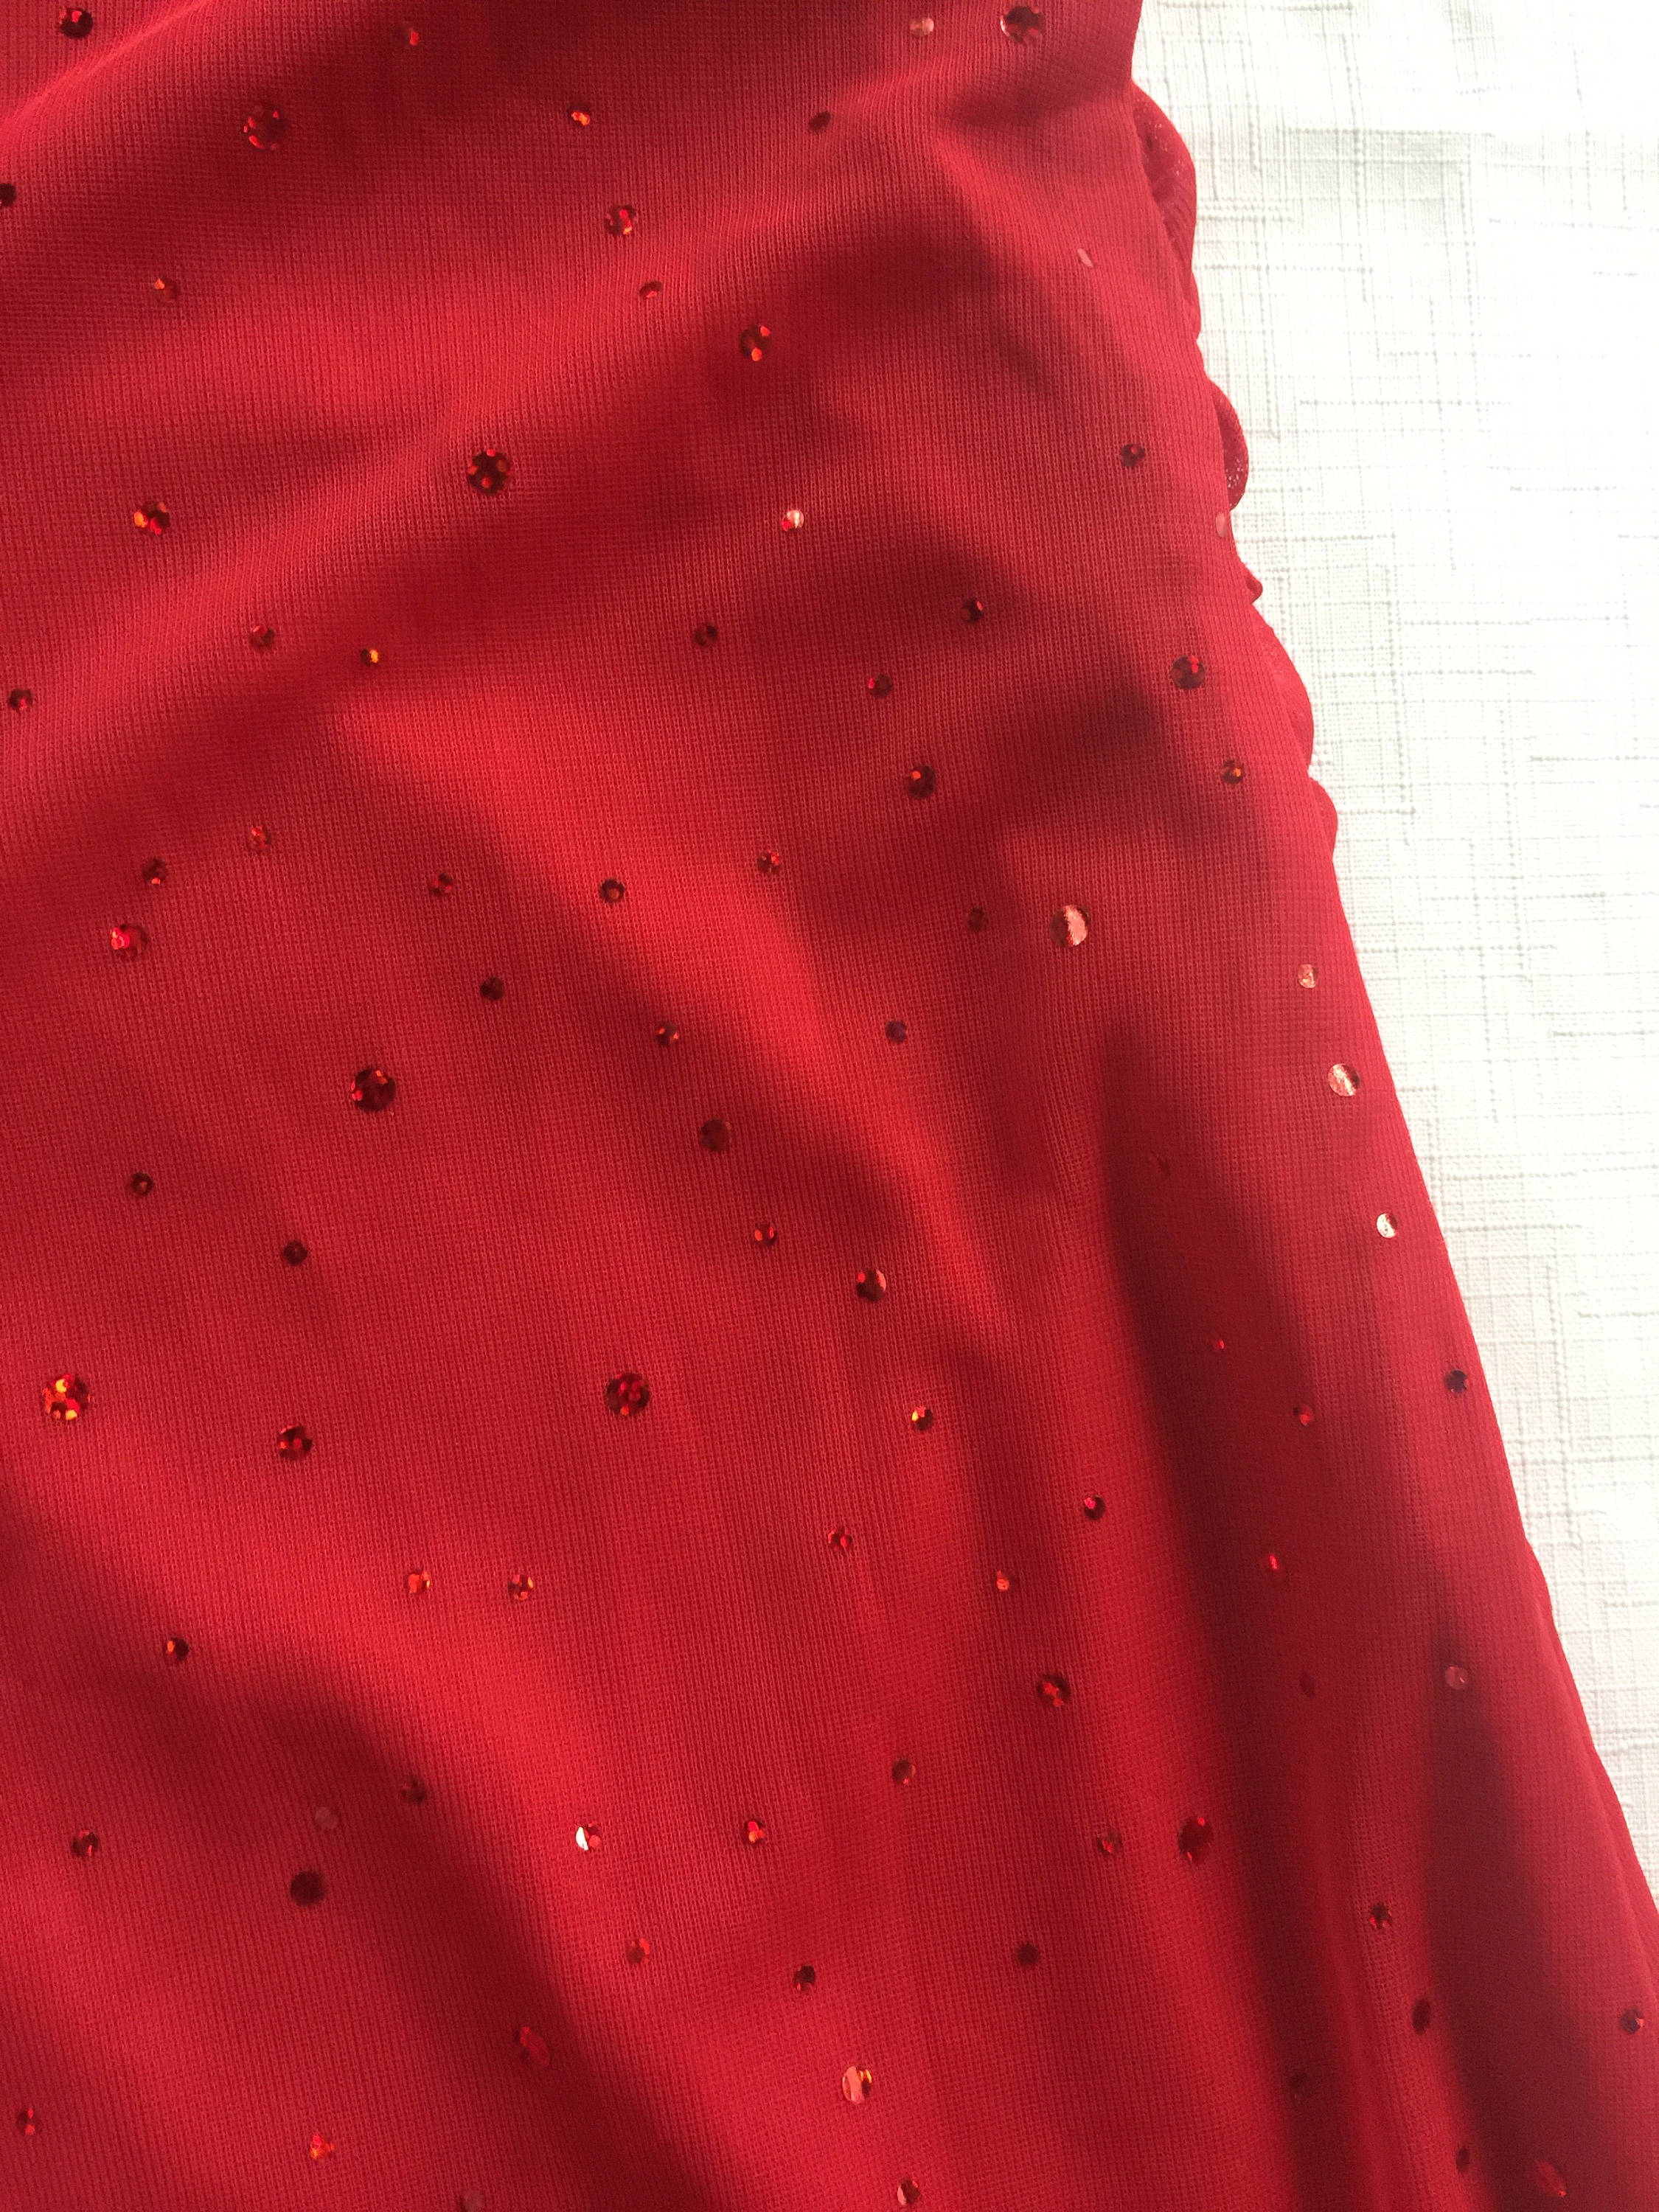 Red Cocktail Dress Sparkly Red Dress Red Sequin Dress 80s | Etsy